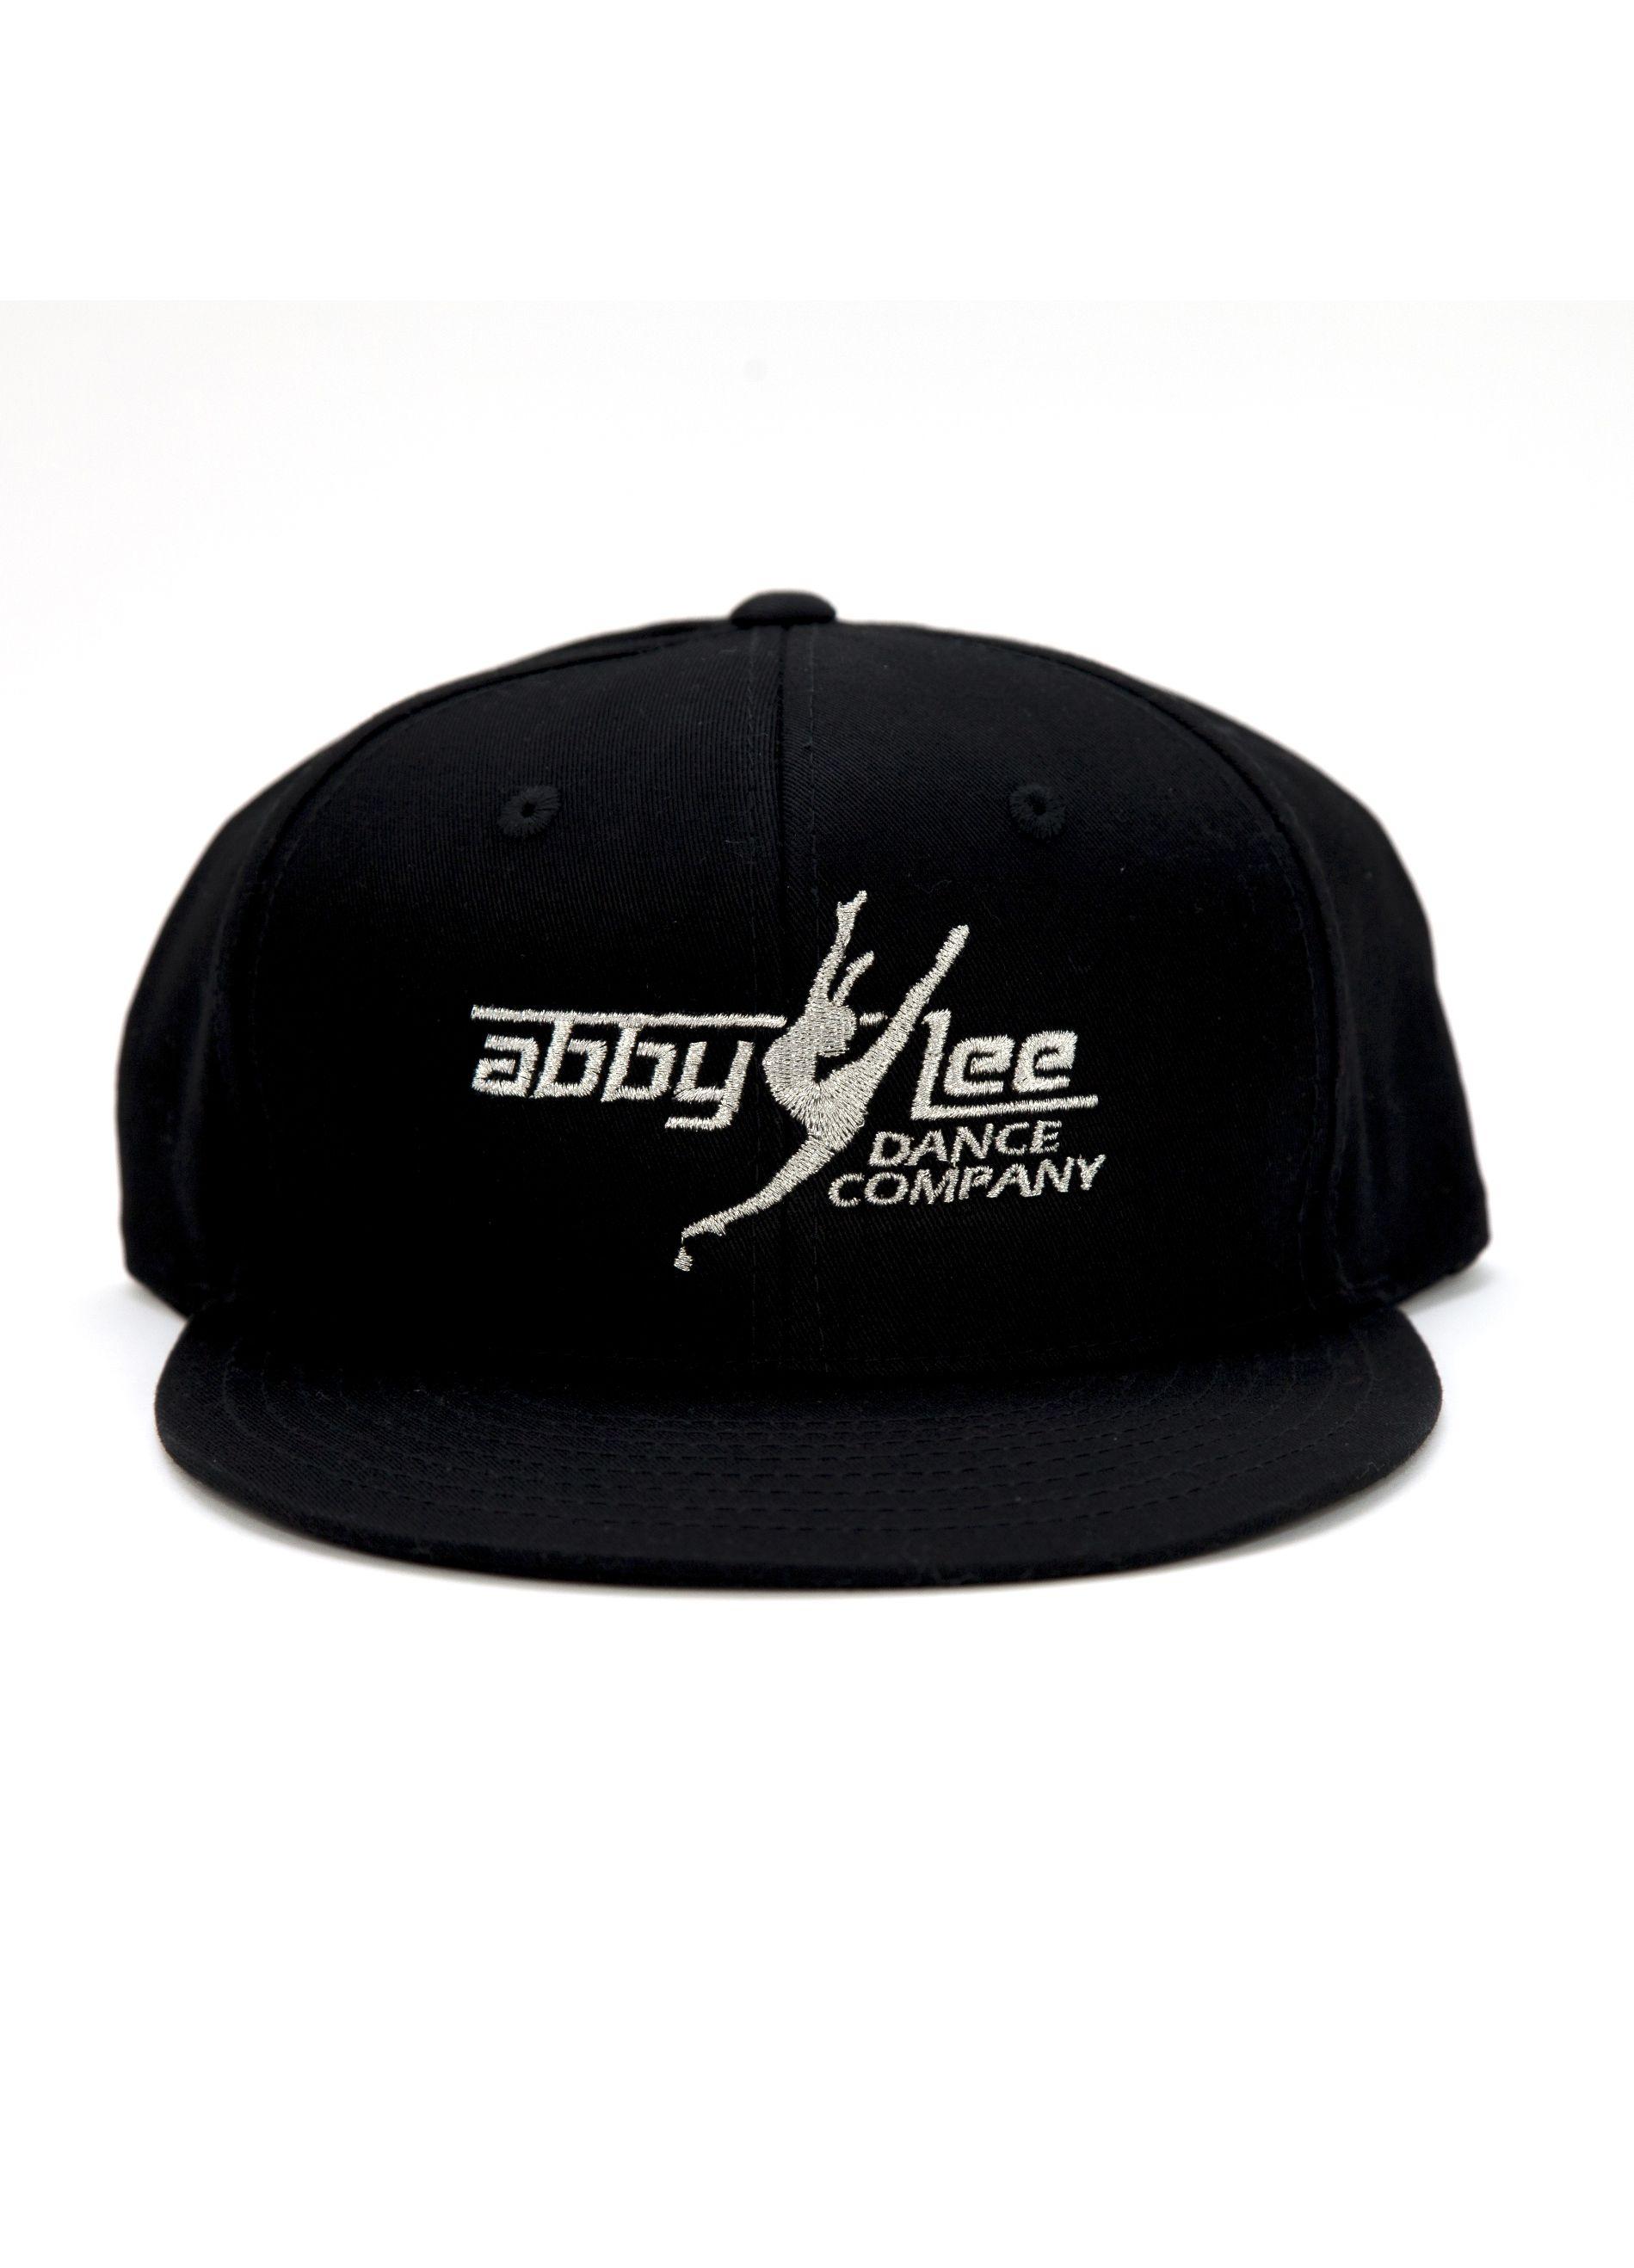 ALDC Logo - Black Hat with Silver Abby Lee Dance Co. Logo